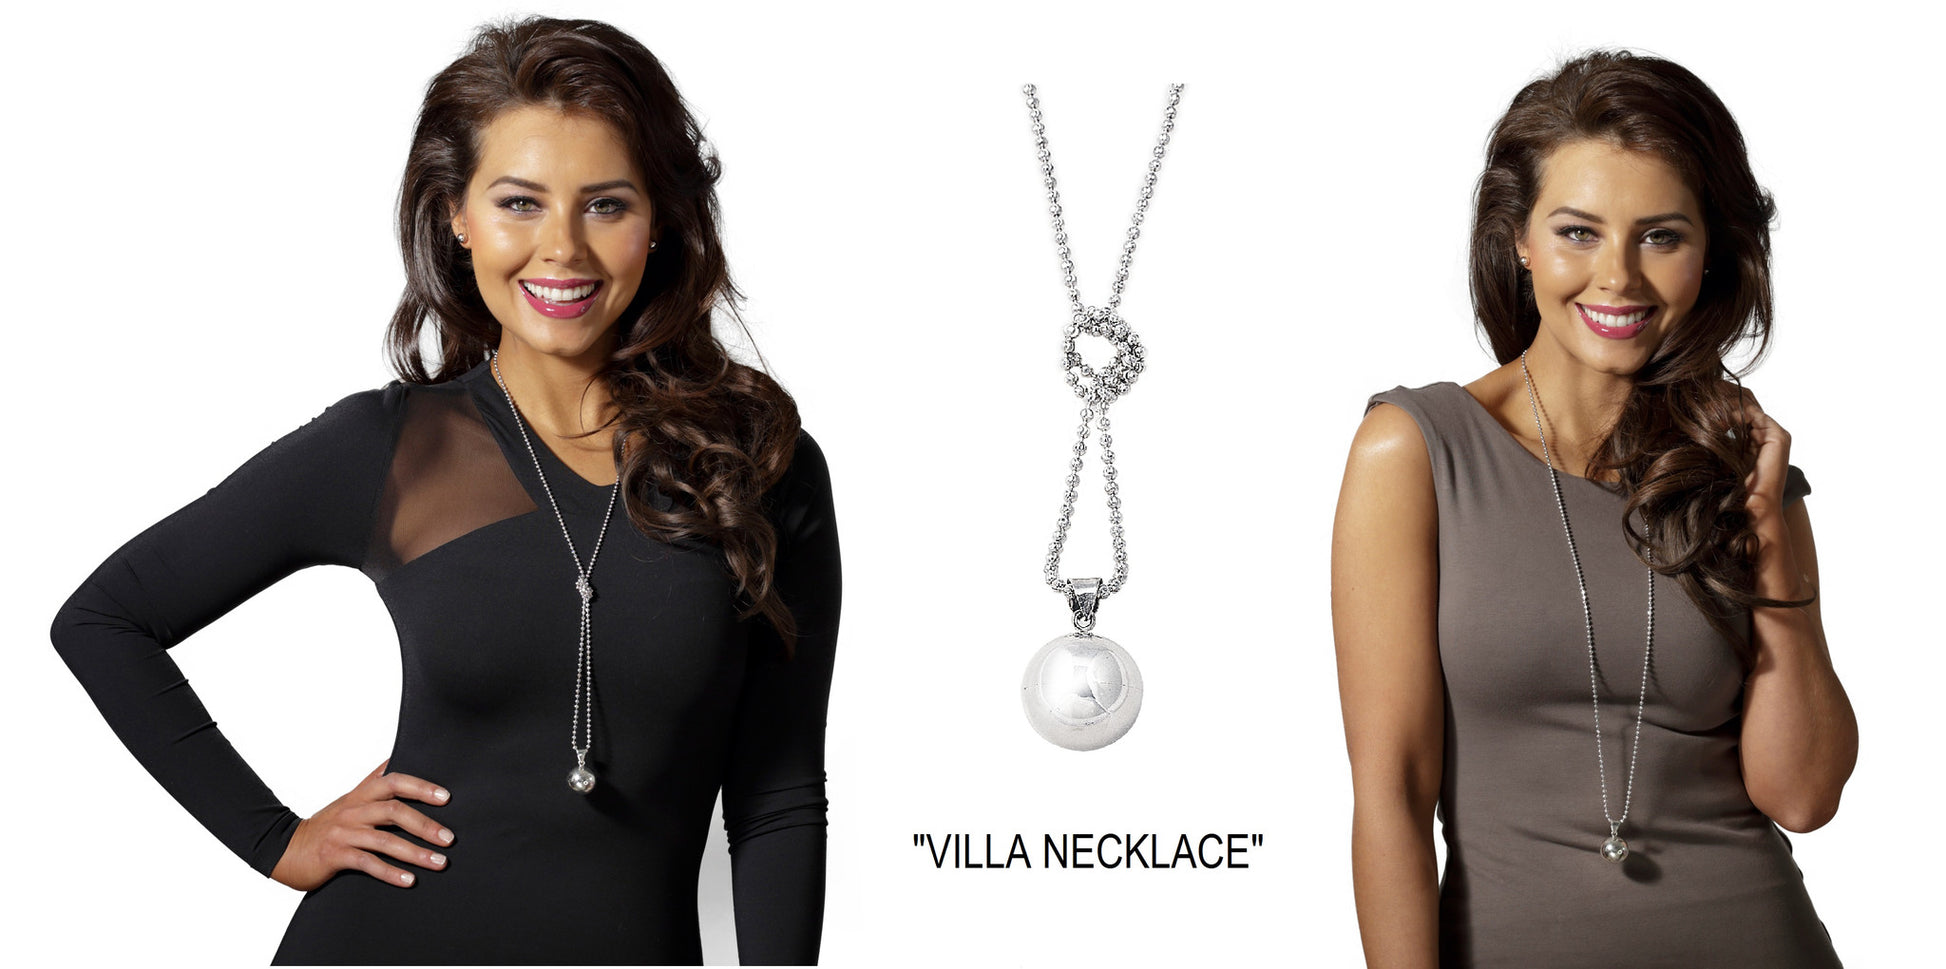 Luxurious Harmony Villa Set in 925 Sterling Silver. Long ball necklace and matching stud earrings. Worldwide shipping from Australia. Affordable luxury jewellery by Bellagio & Co.